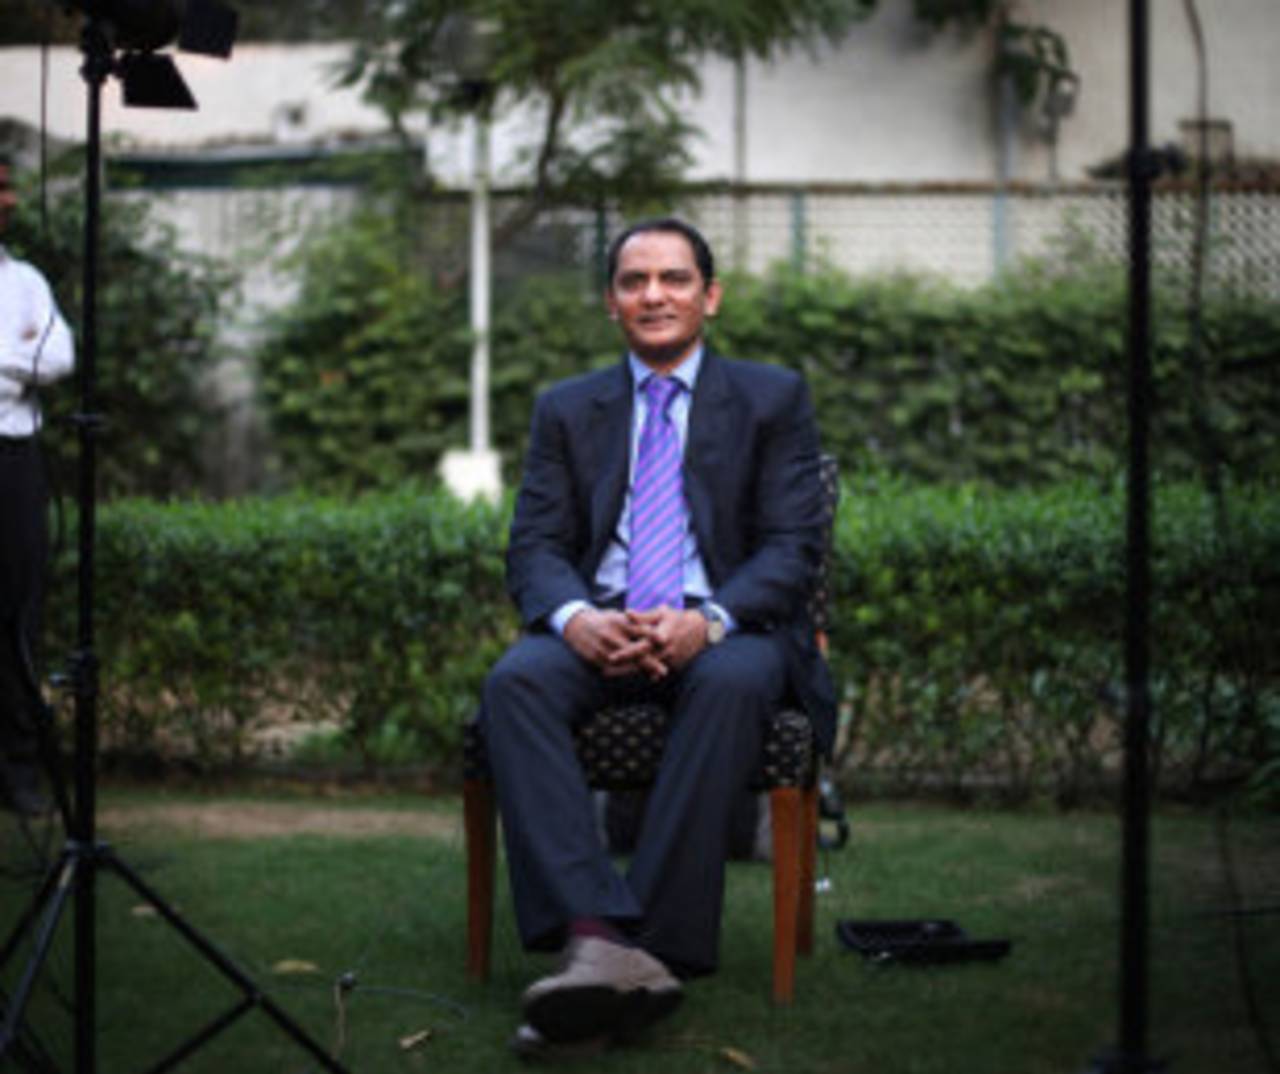 The BCCI's life ban on Mohammad Azharuddin was termed 'unsustainable' in a court order recently&nbsp;&nbsp;&bull;&nbsp;&nbsp;Associated Press